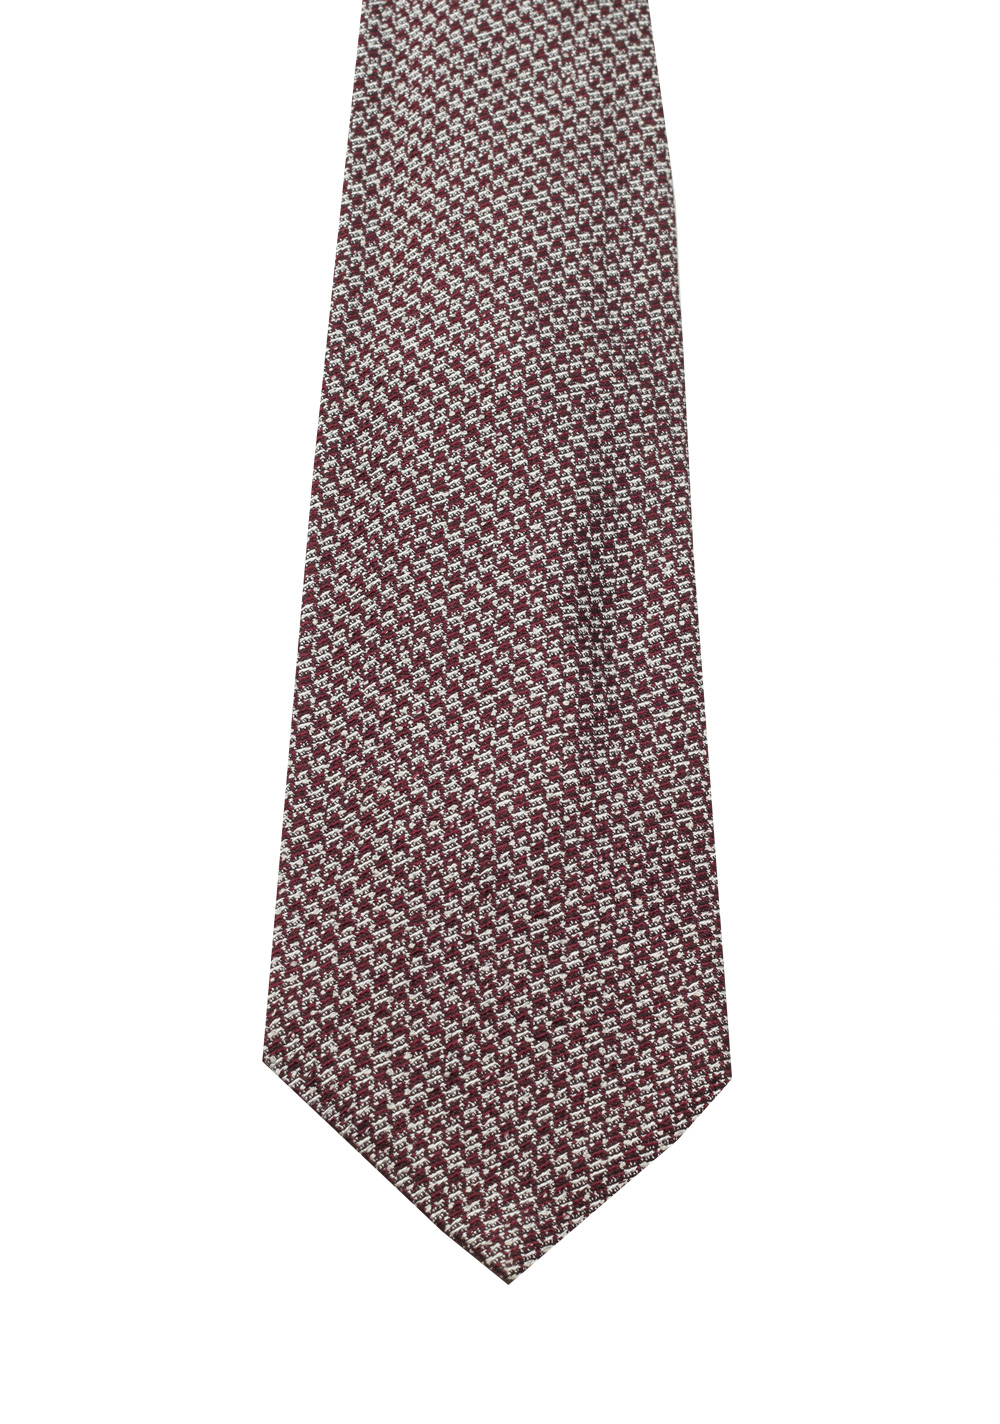 TOM FORD Patterned Burgundy Tie In Silk | Costume Limité